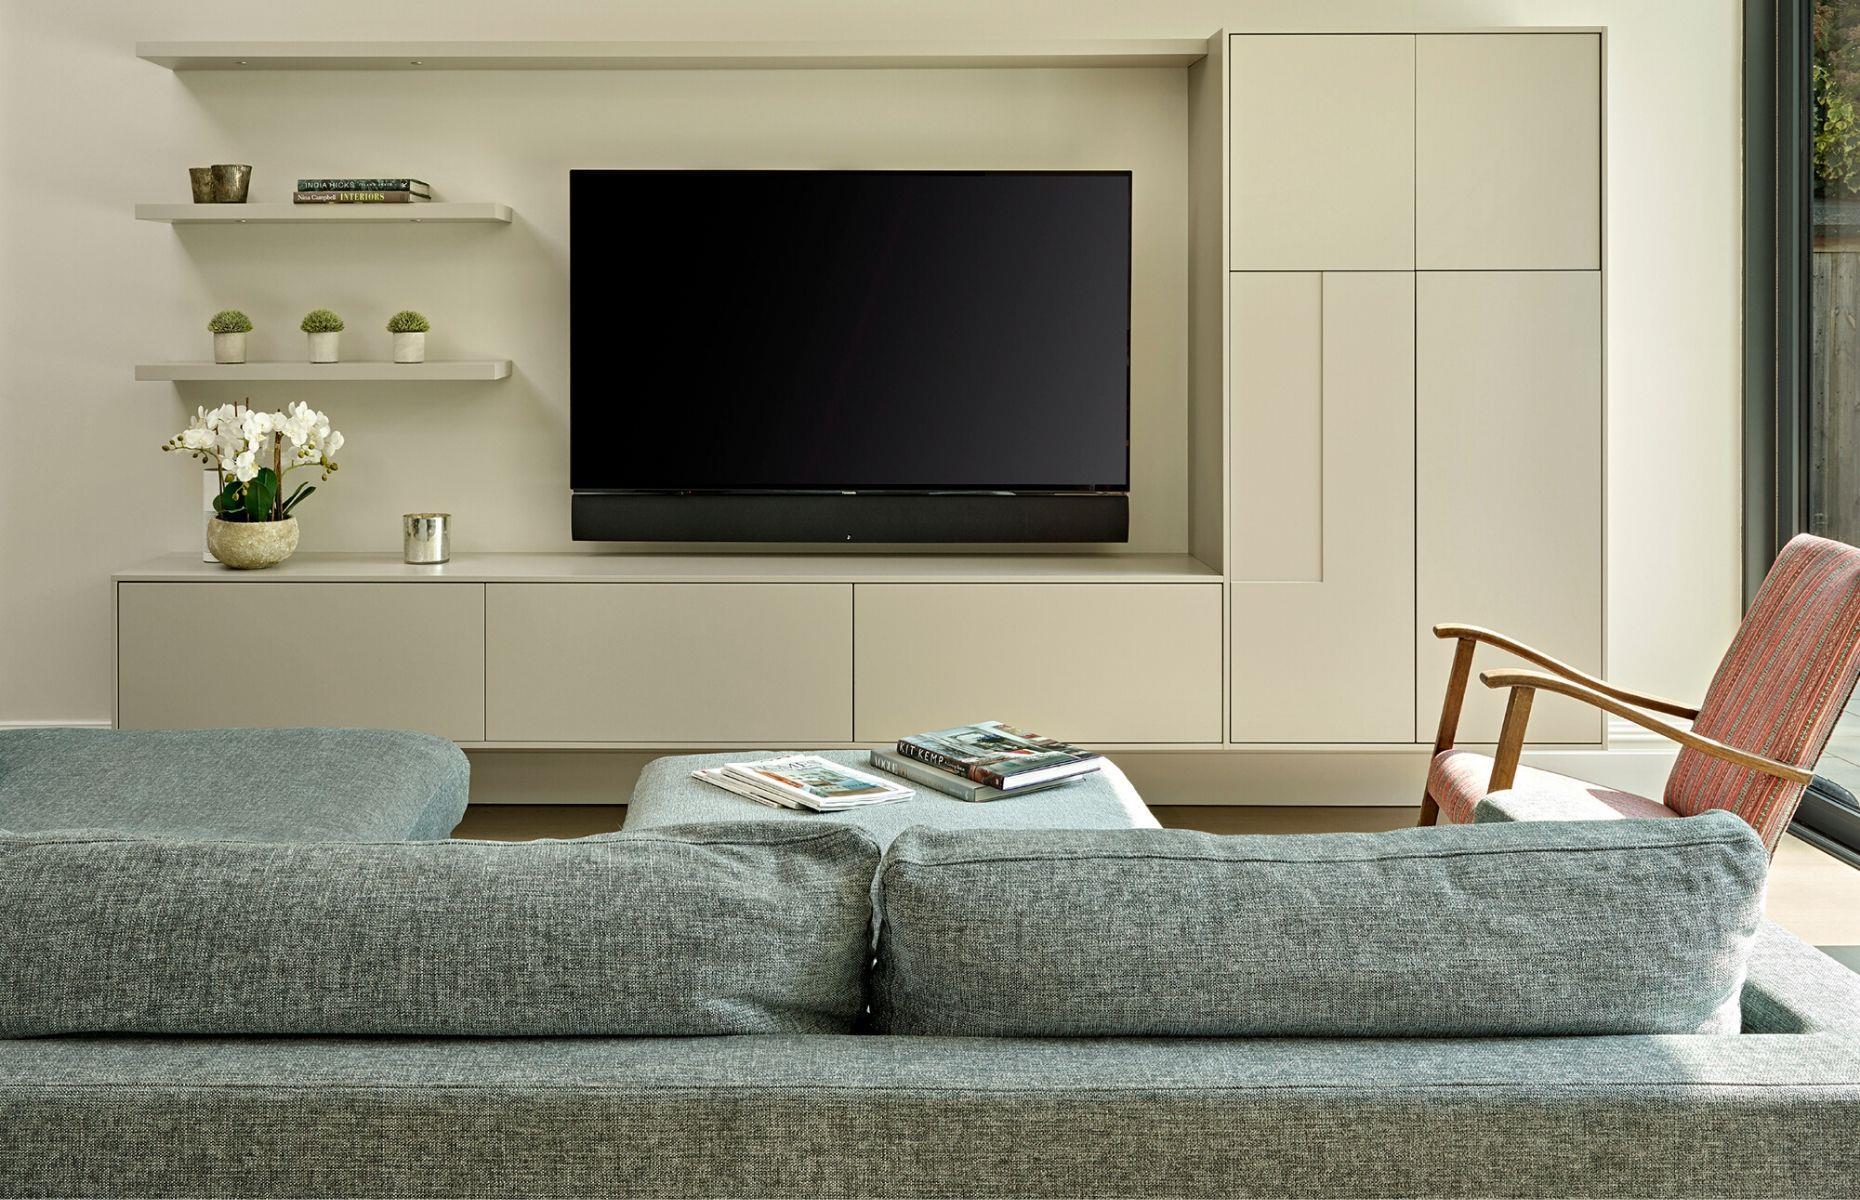 <p>When you come to designing a living room or media room, plan your TV and audio systems first. Think beyond the room to the whole house—do you want to incorporate a <a href="https://www.loveproperty.com/news/79848/how-to-build-a-house-with-integrated-smart-home-tech">home automation system</a> that includes lighting, security and heating controls as well as your TV and audio? Be flexible: keep the space around the TV and audio equipment clear and accessible so it's easy to upgrade in the future.</p>